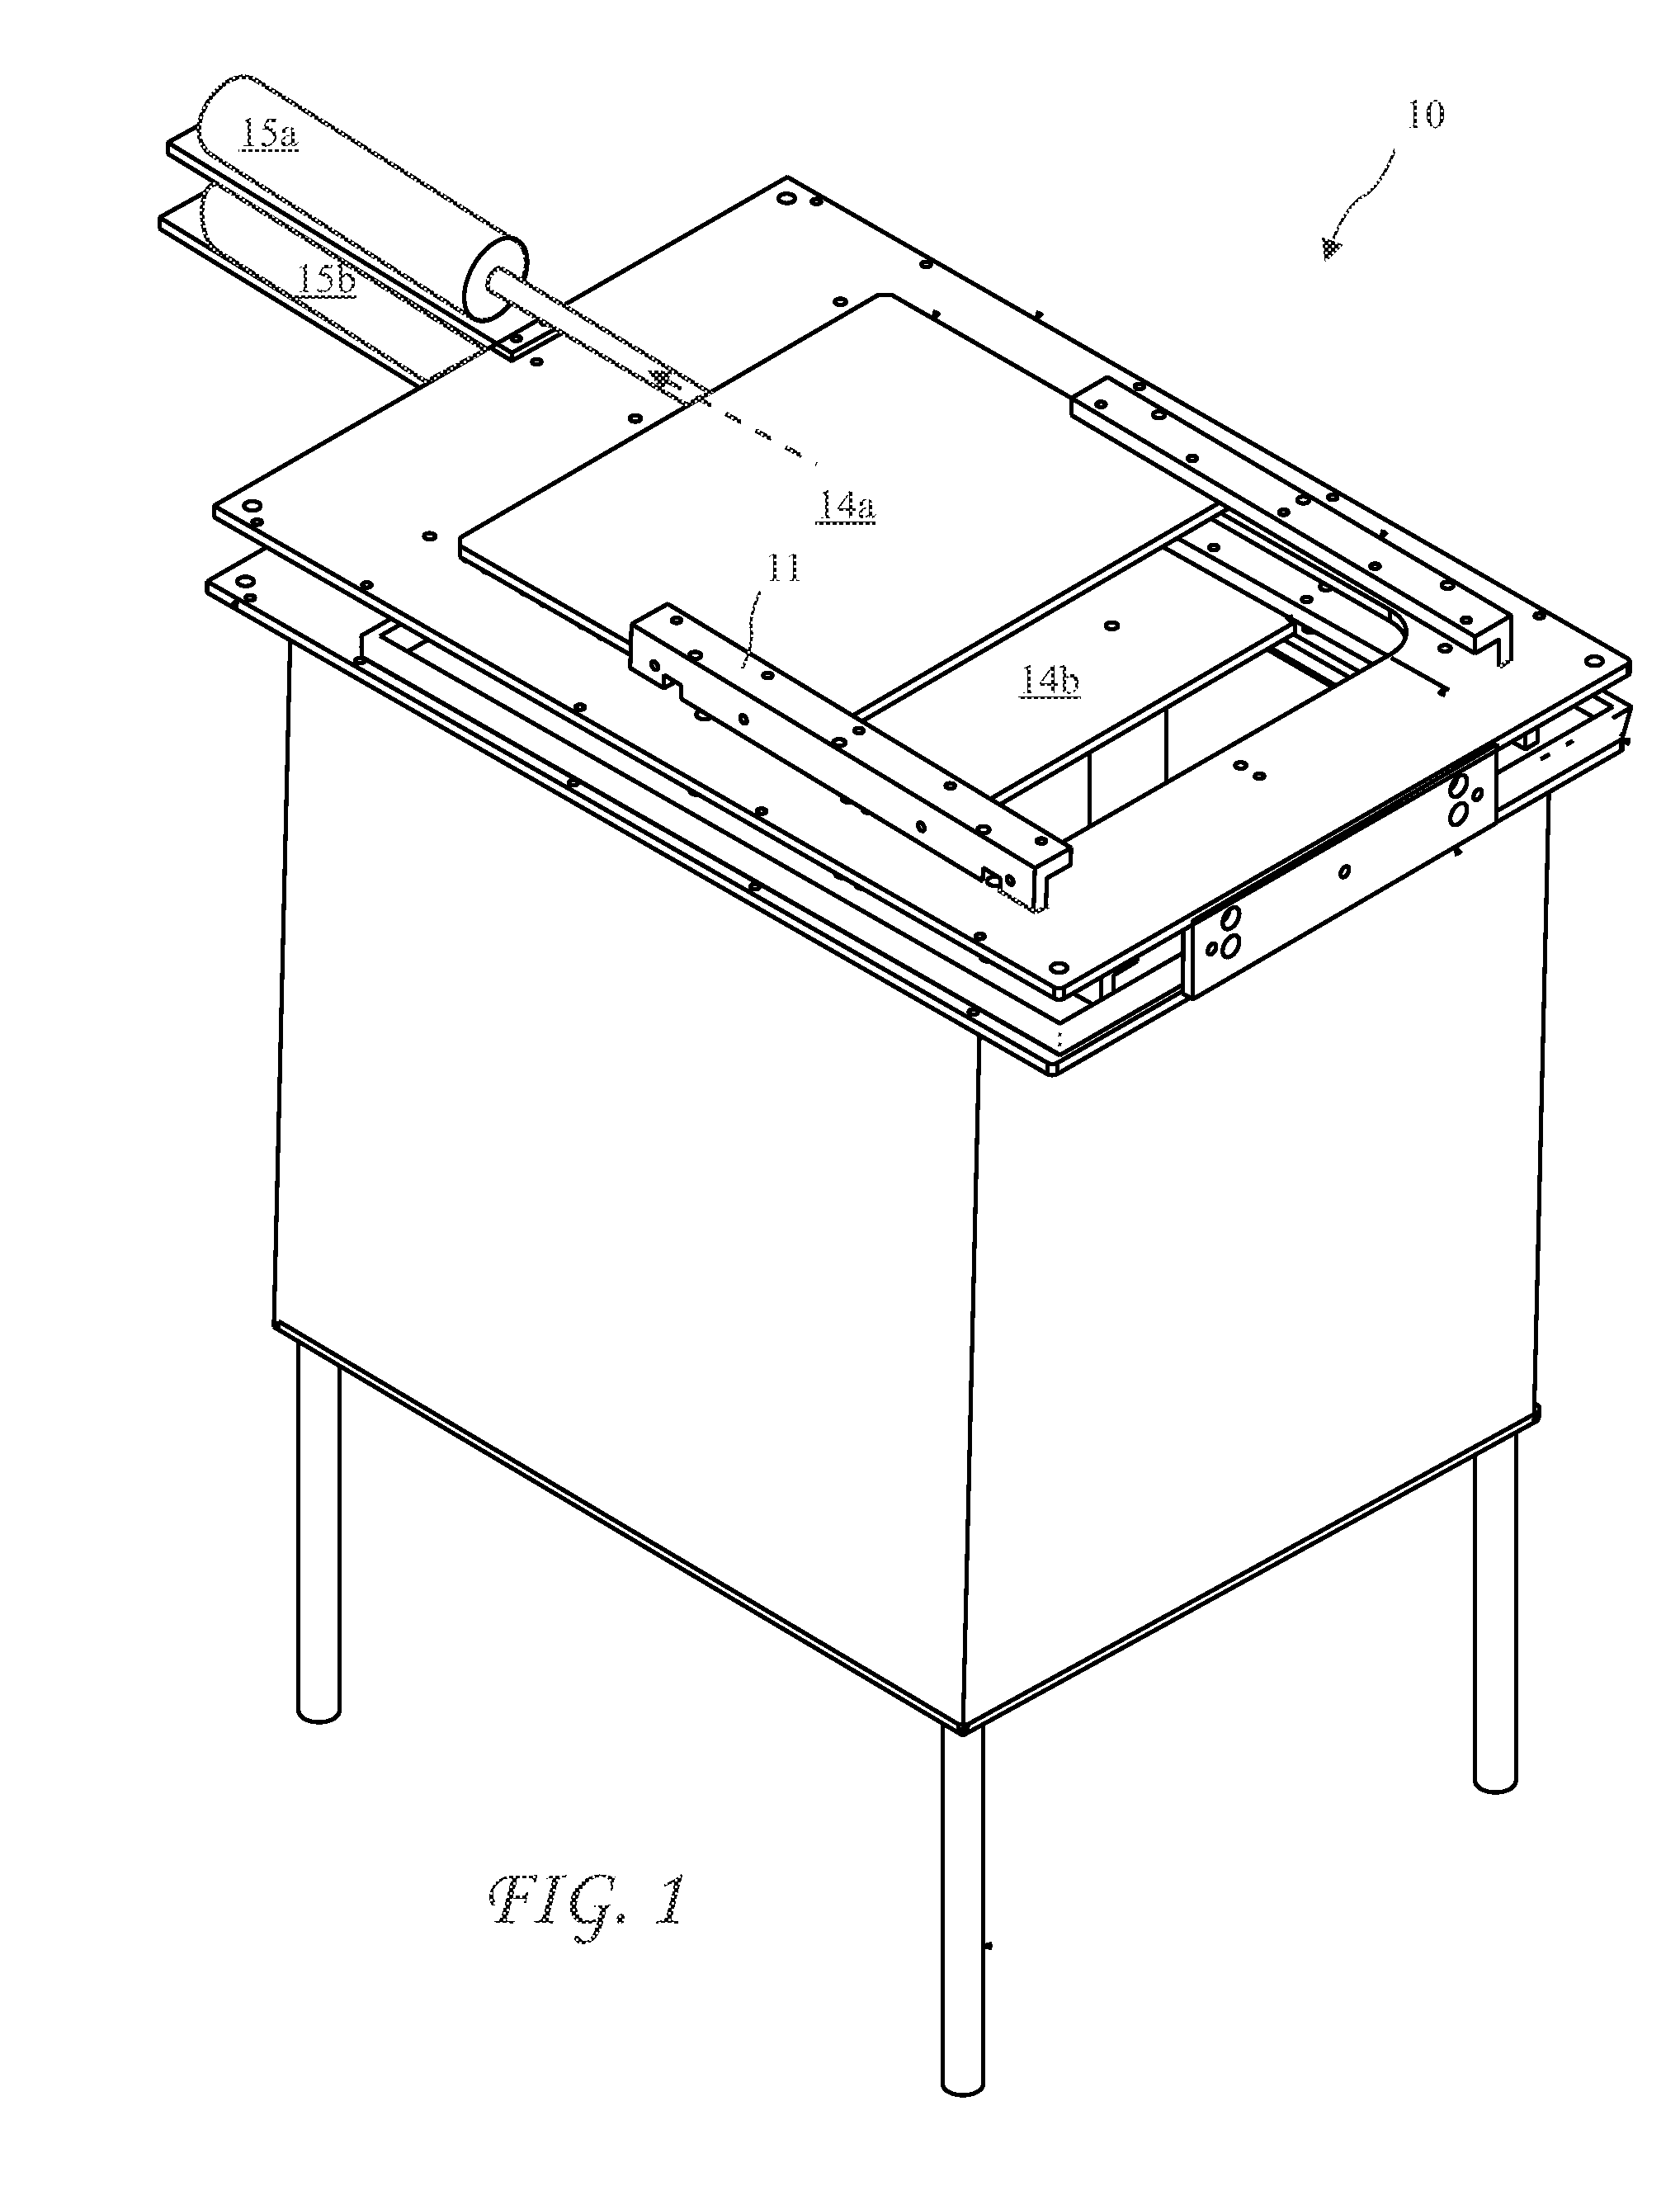 Apparatus and Method for On-site Disposal of Trace Chemo Containers and Waste, Expired Pharmaceuticals, and Sharps Containers and Sharps